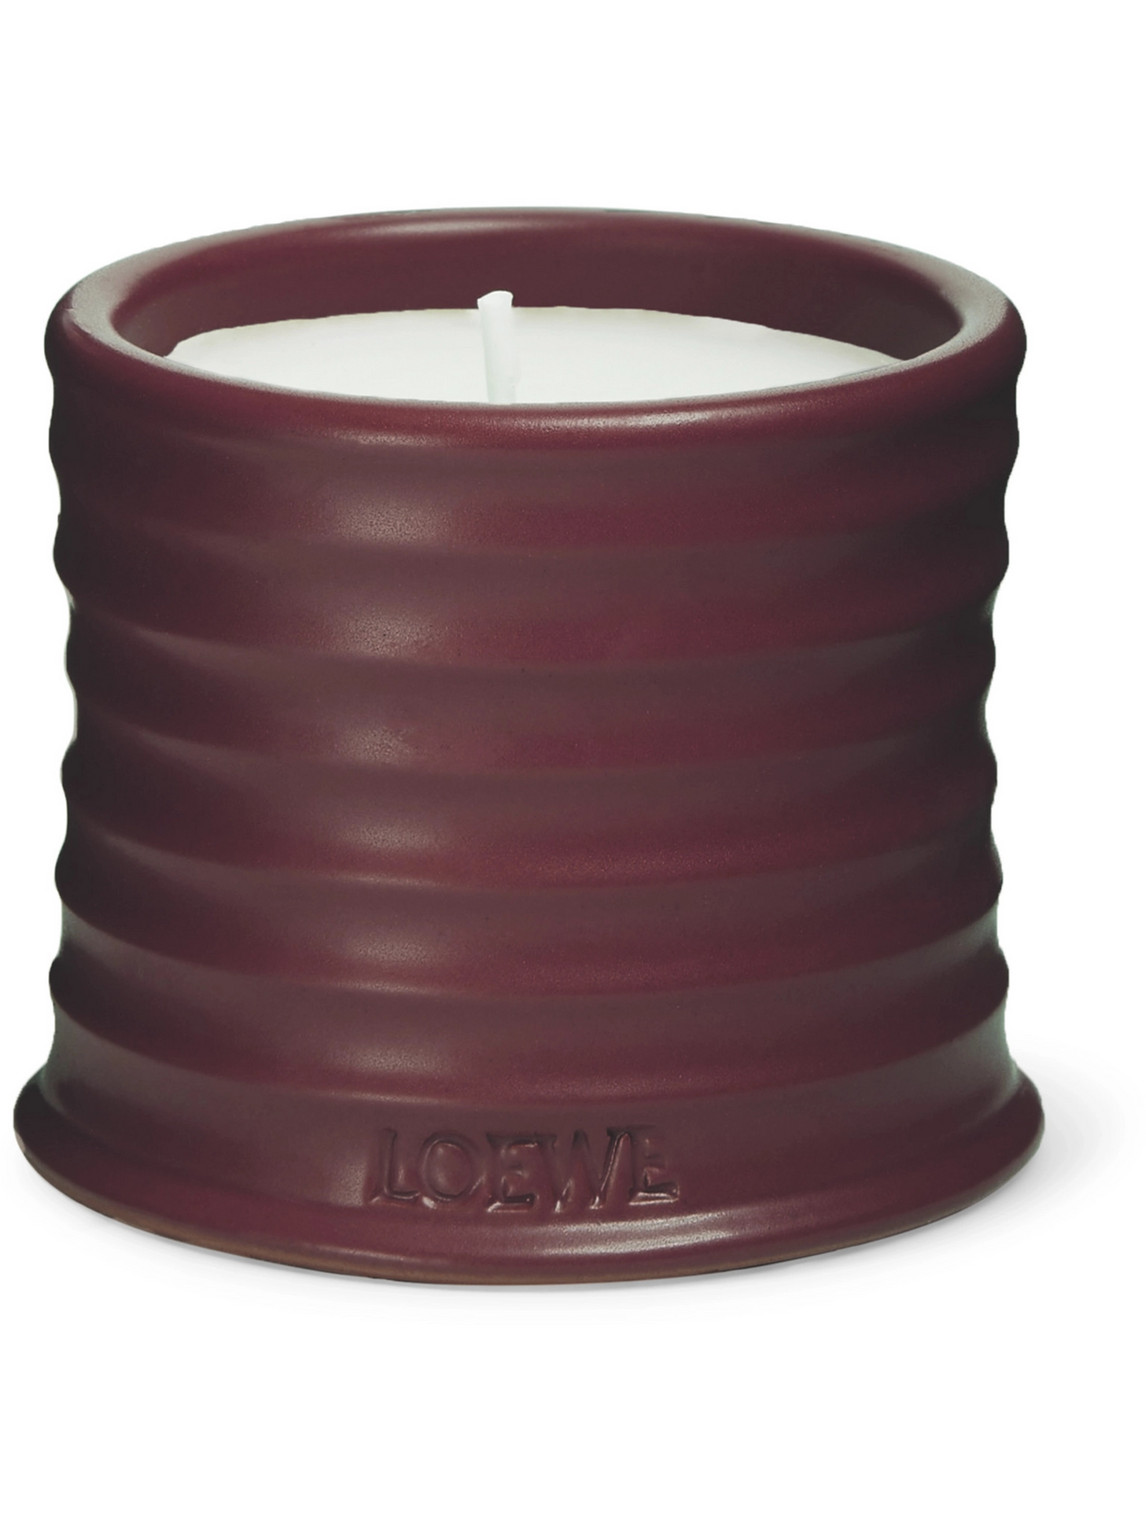 Loewe Home Scents Beetroot Scented Candle, 170g In Colorless